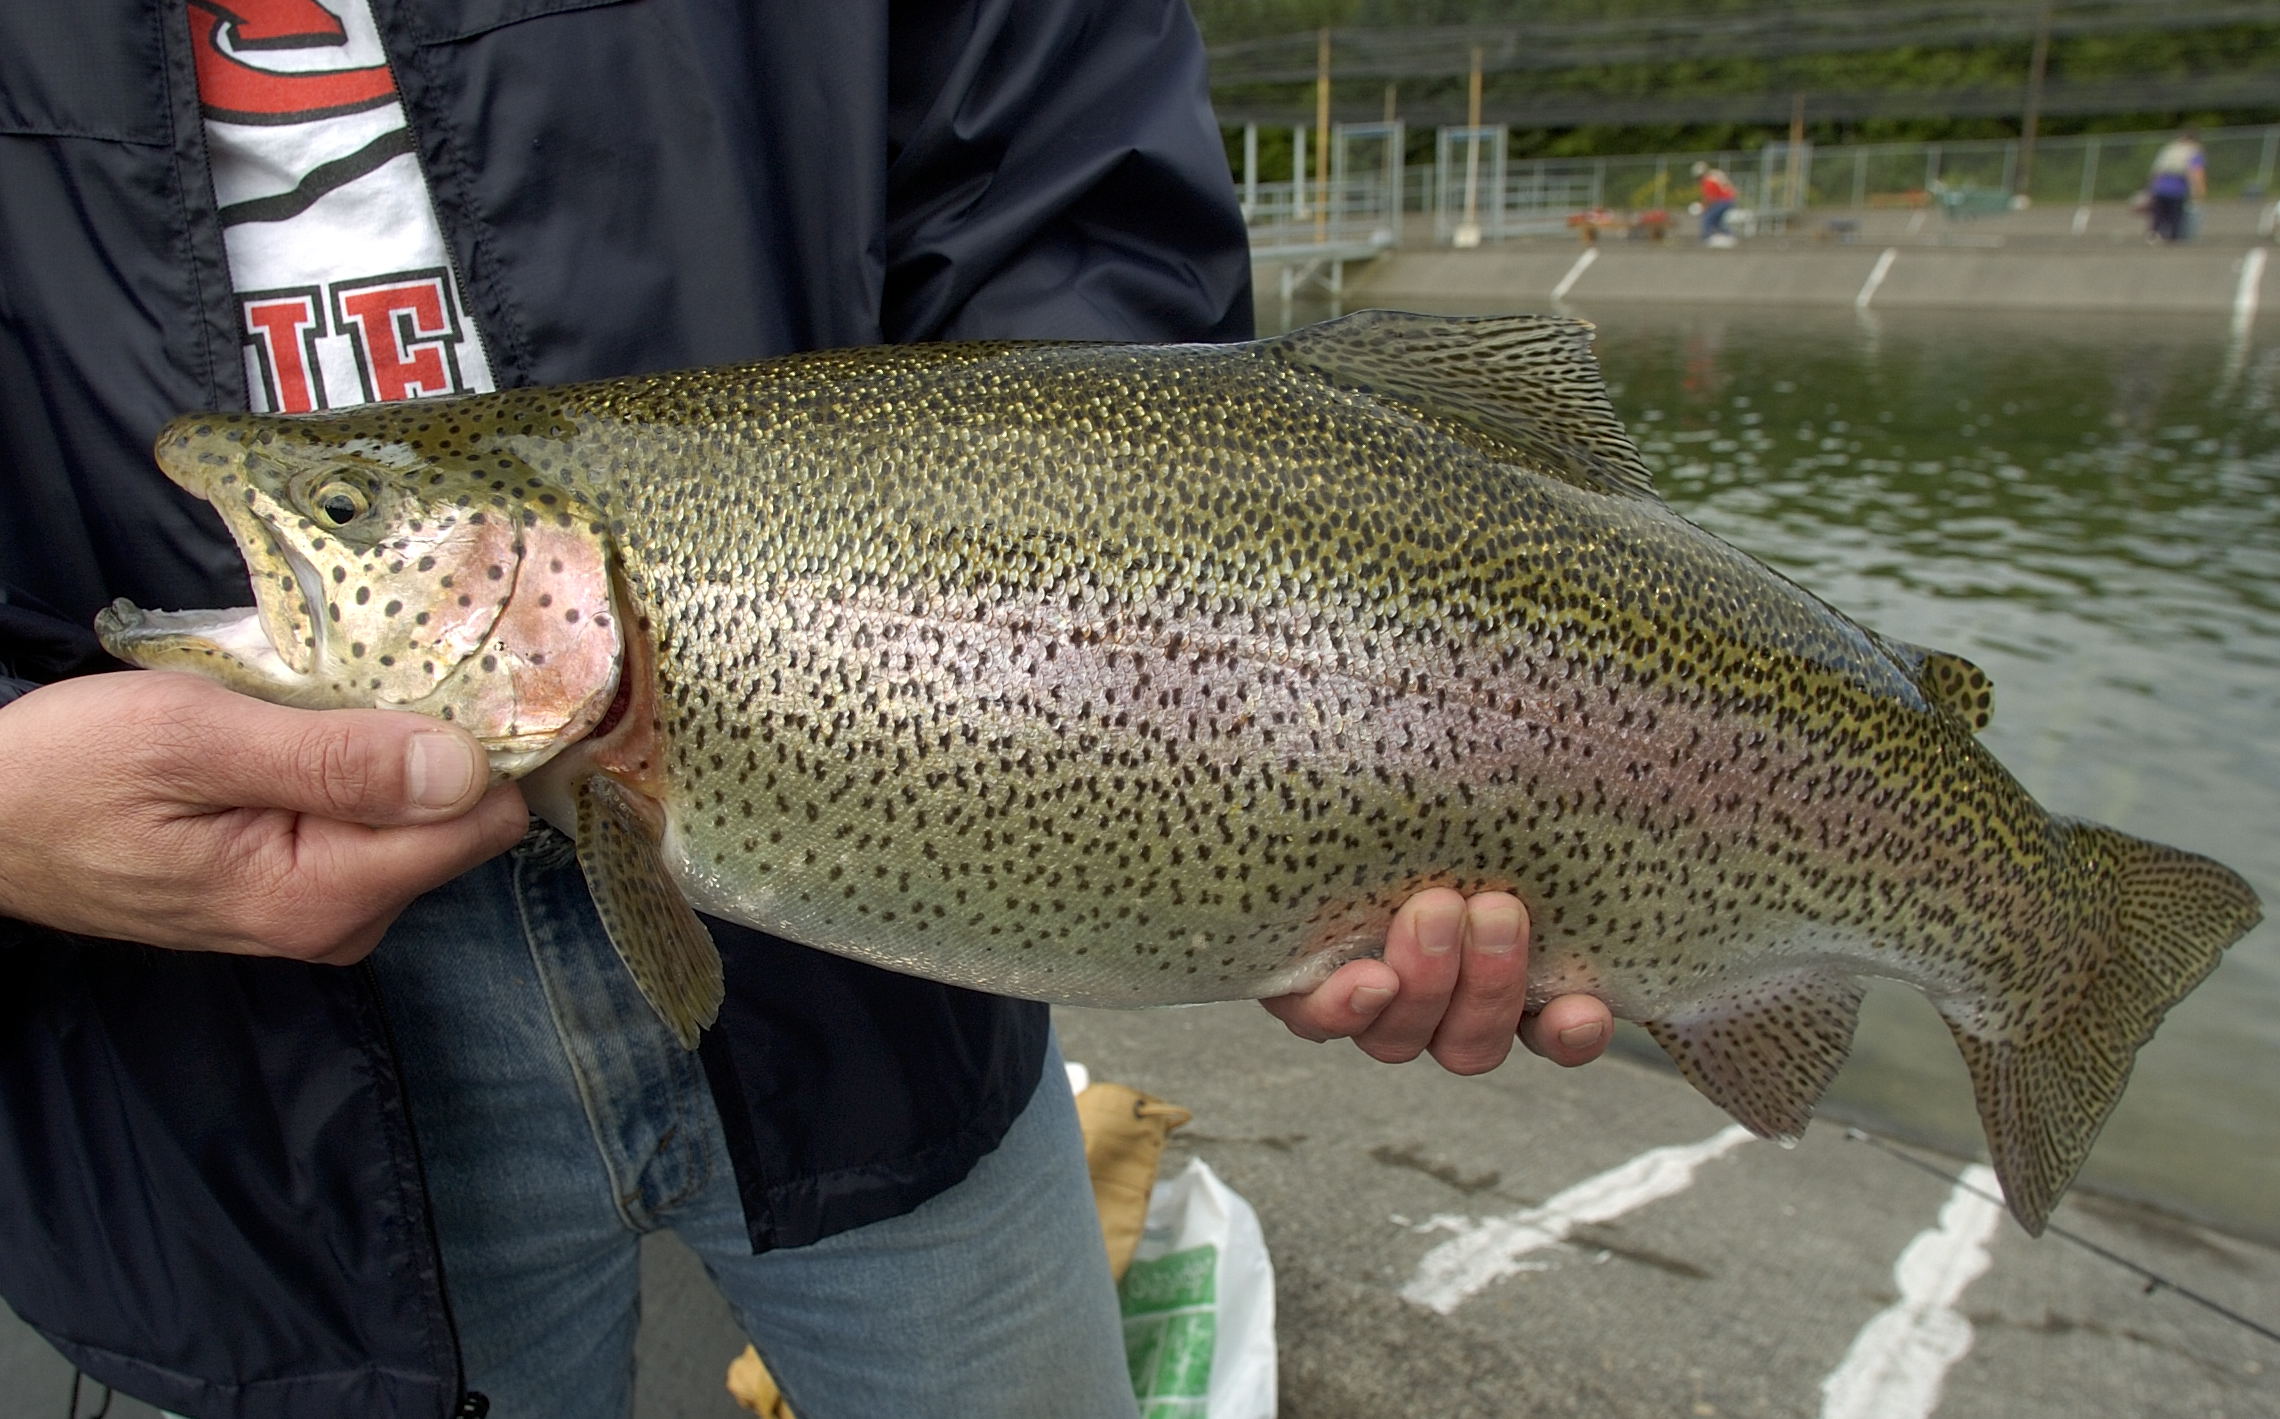 Sturdy rainbow trout a favored fish - The Columbian